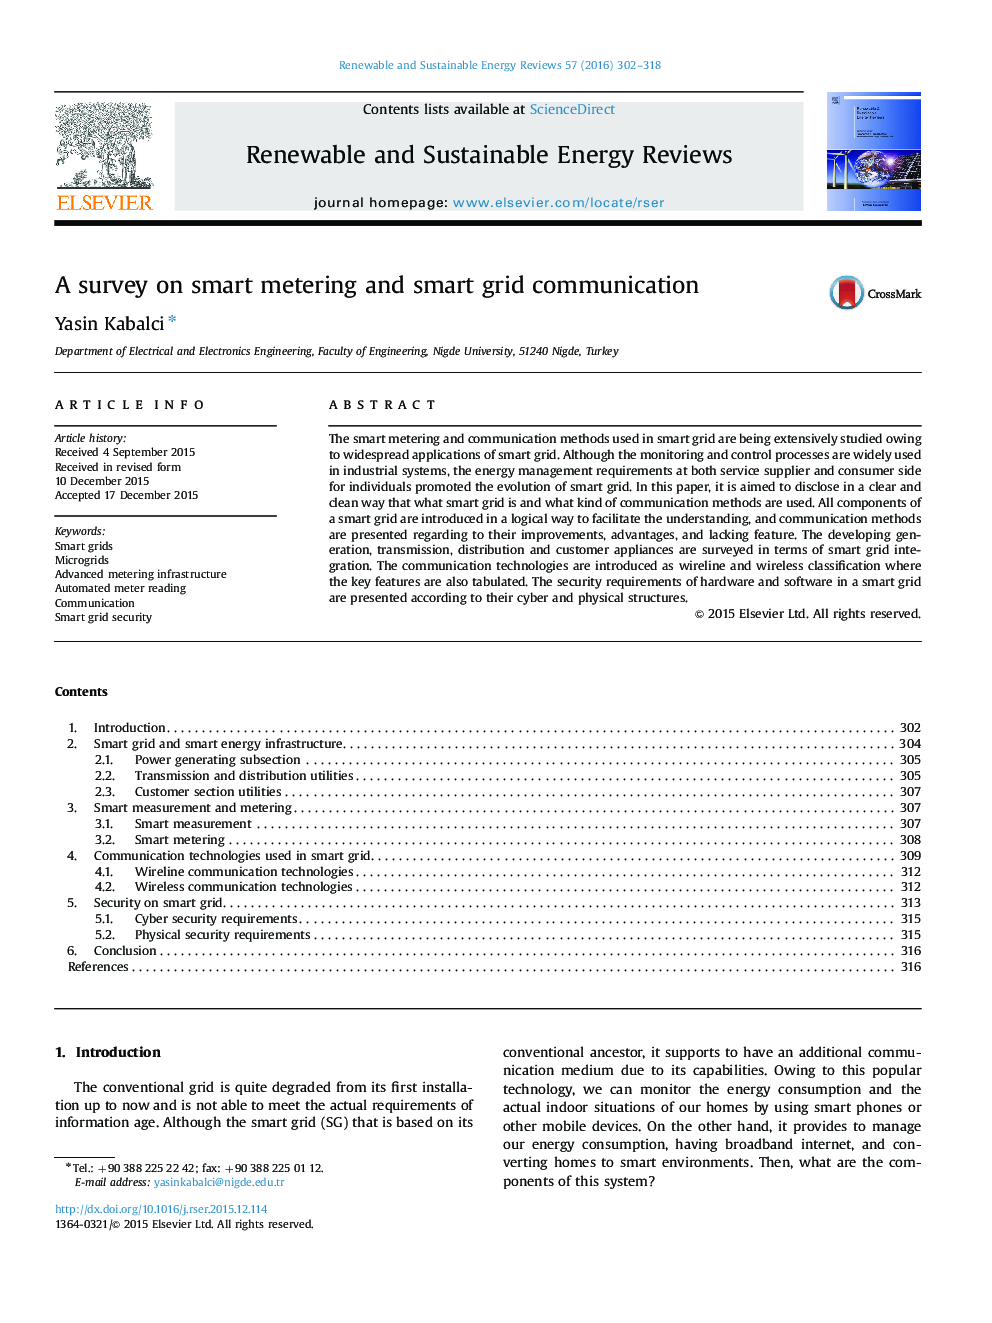 A survey on smart metering and smart grid communication